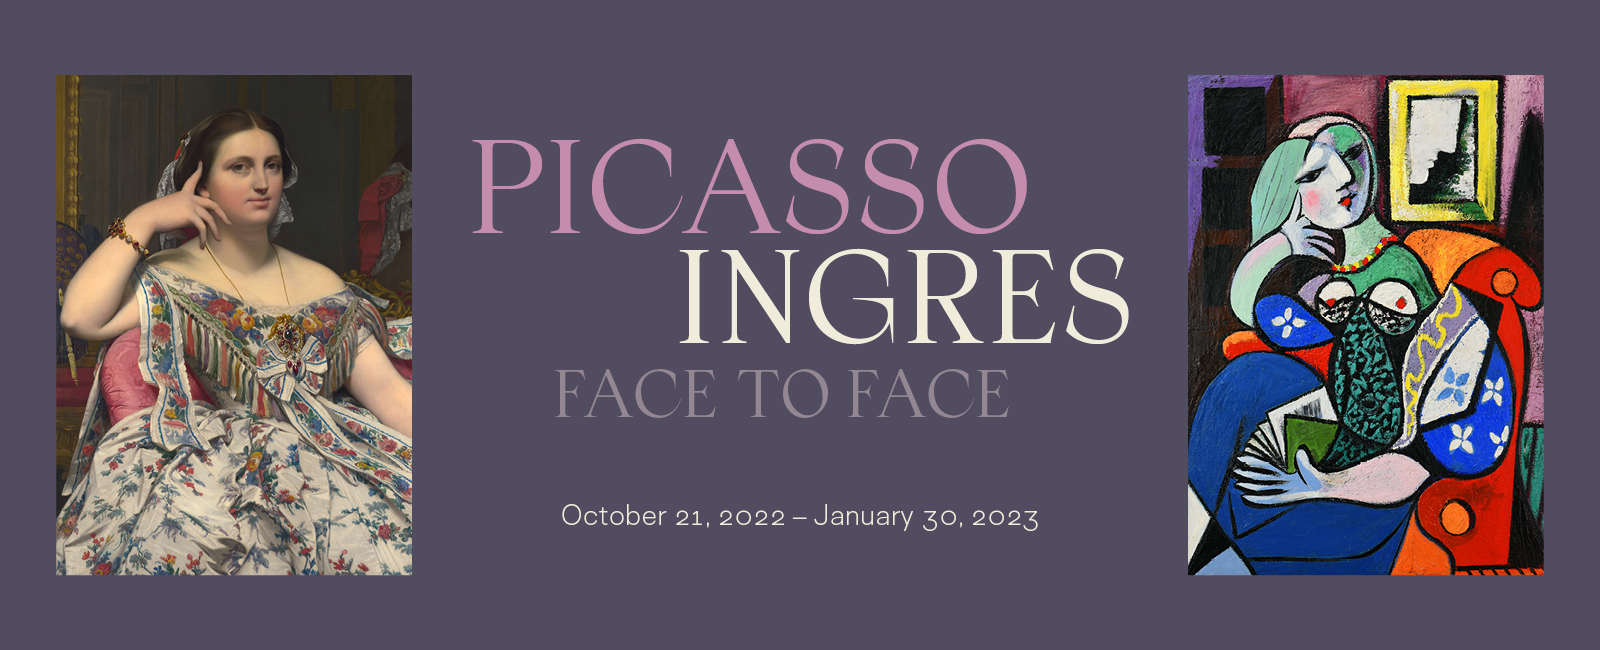 Picasso Ingres: Face to Face exhibition banner